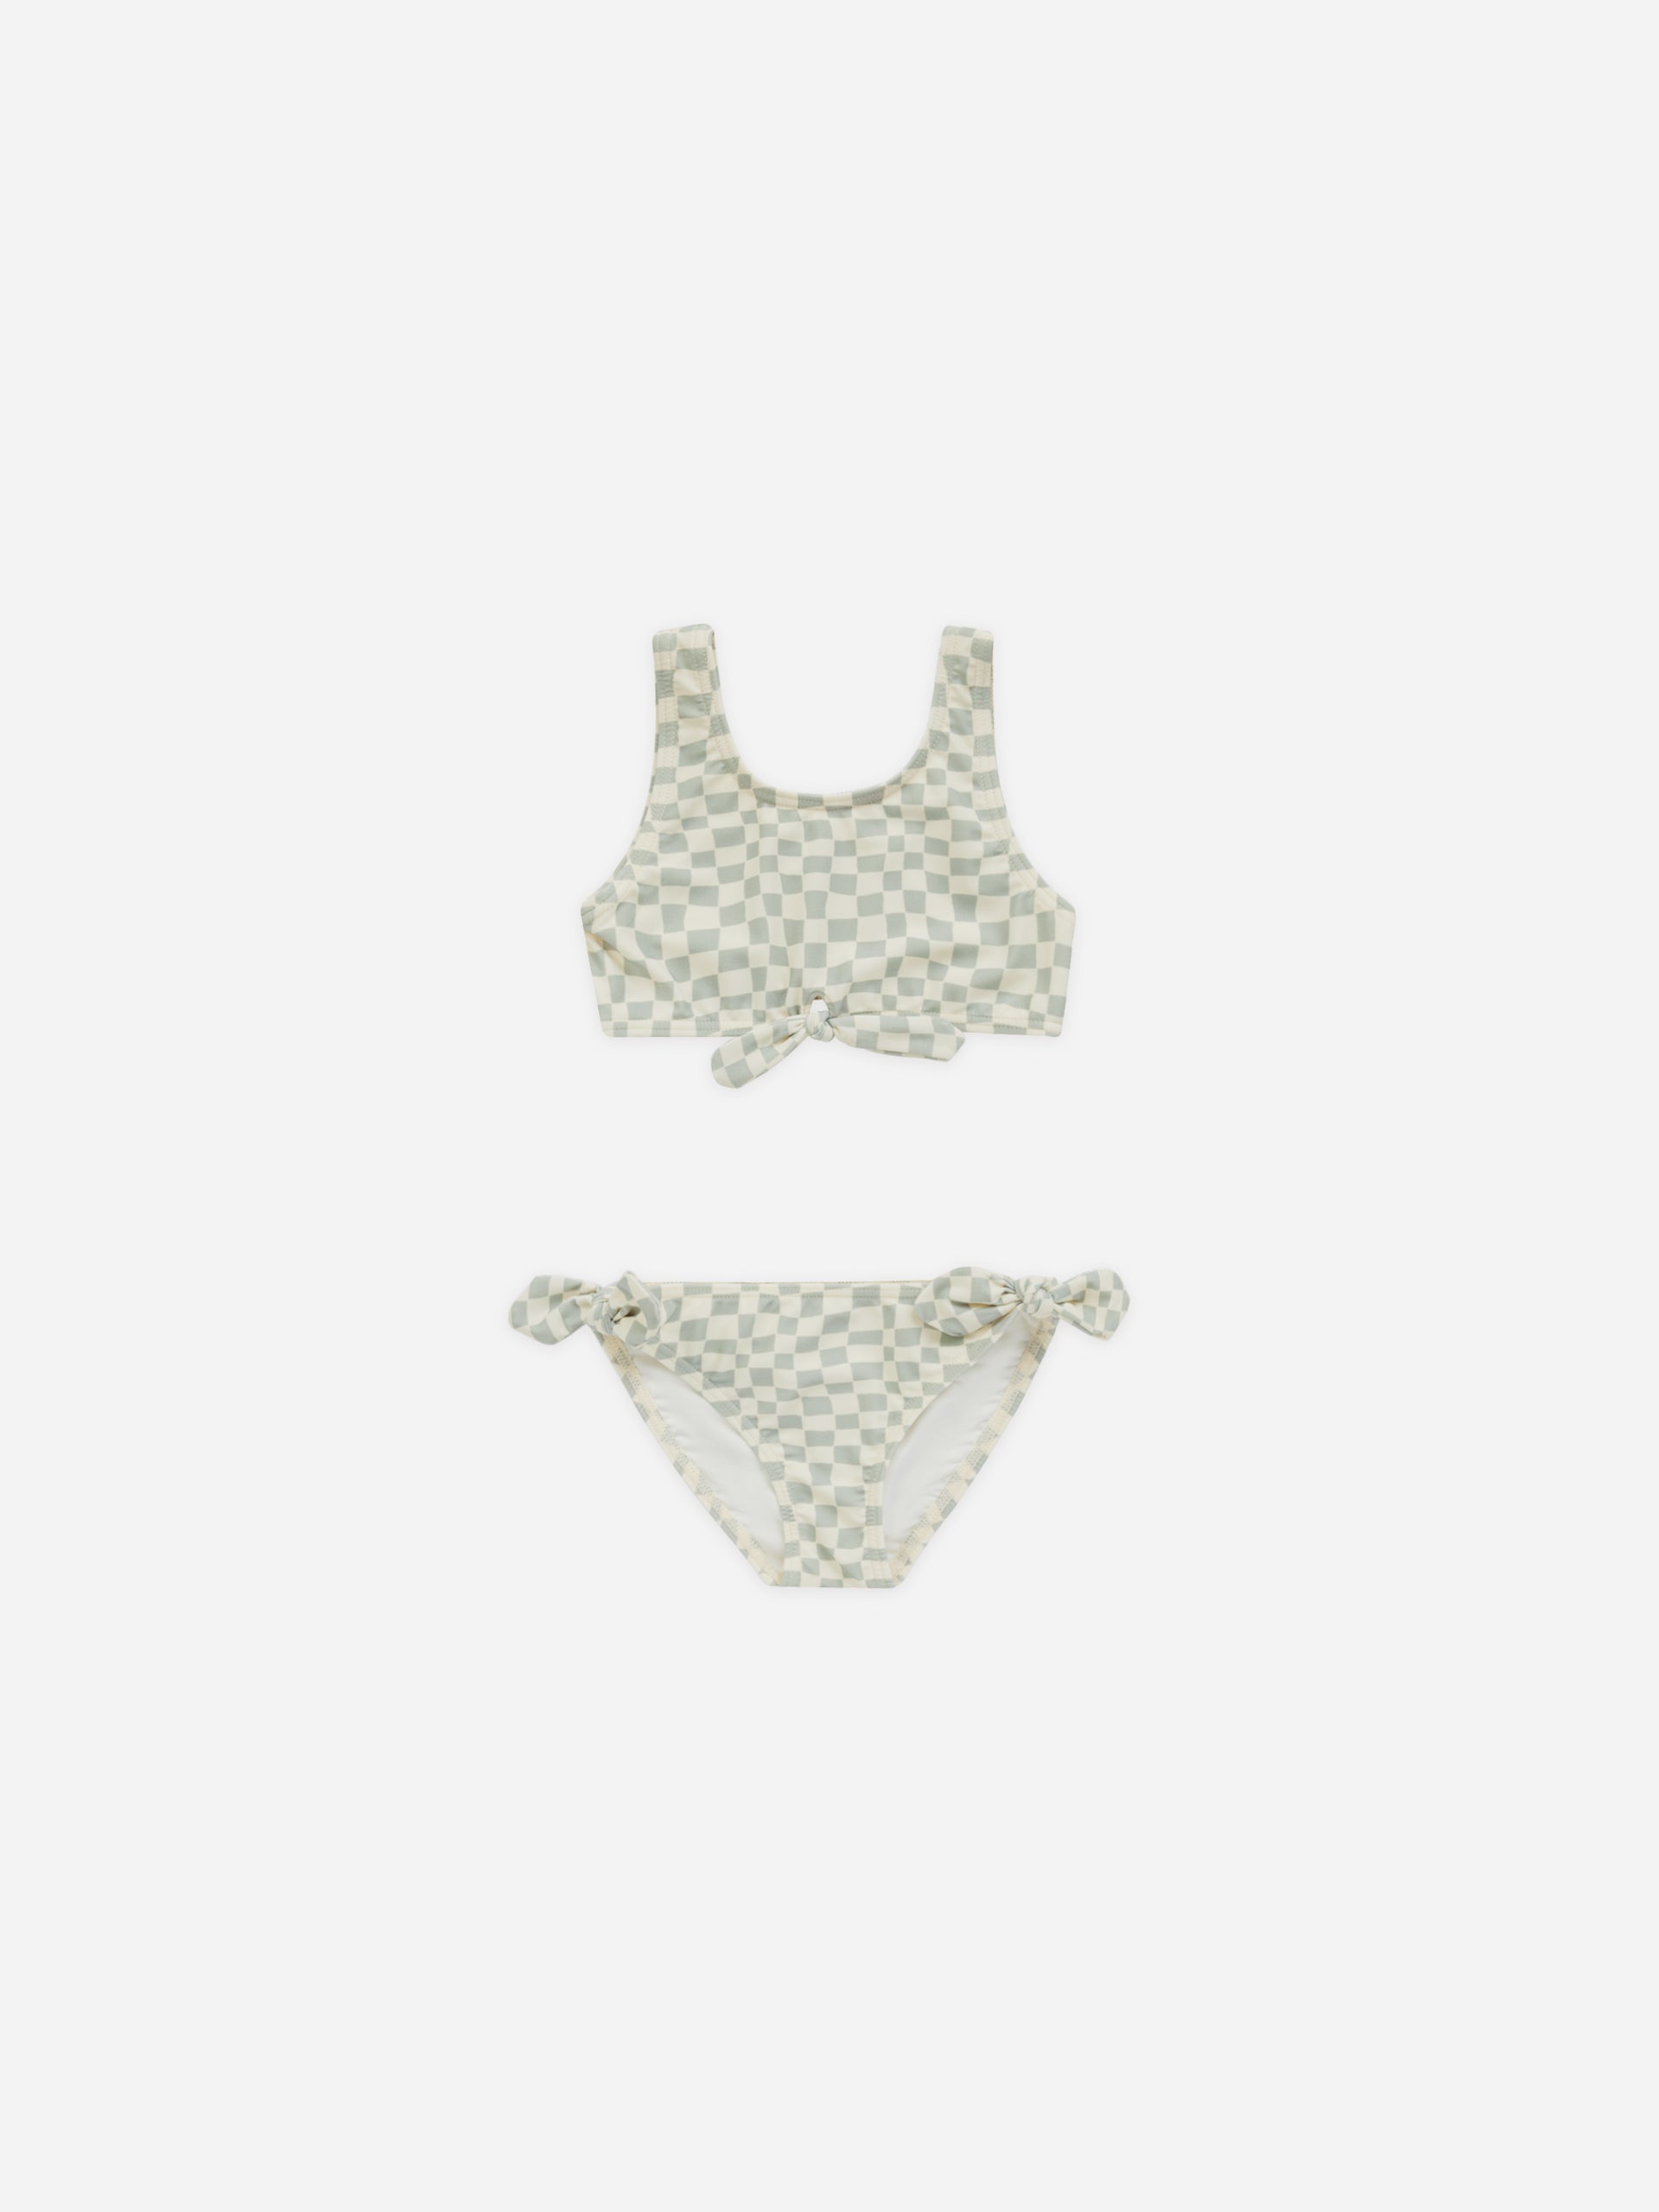 Knotted Bikini || Seafoam Check - Rylee + Cru | Kids Clothes | Trendy Baby Clothes | Modern Infant Outfits |